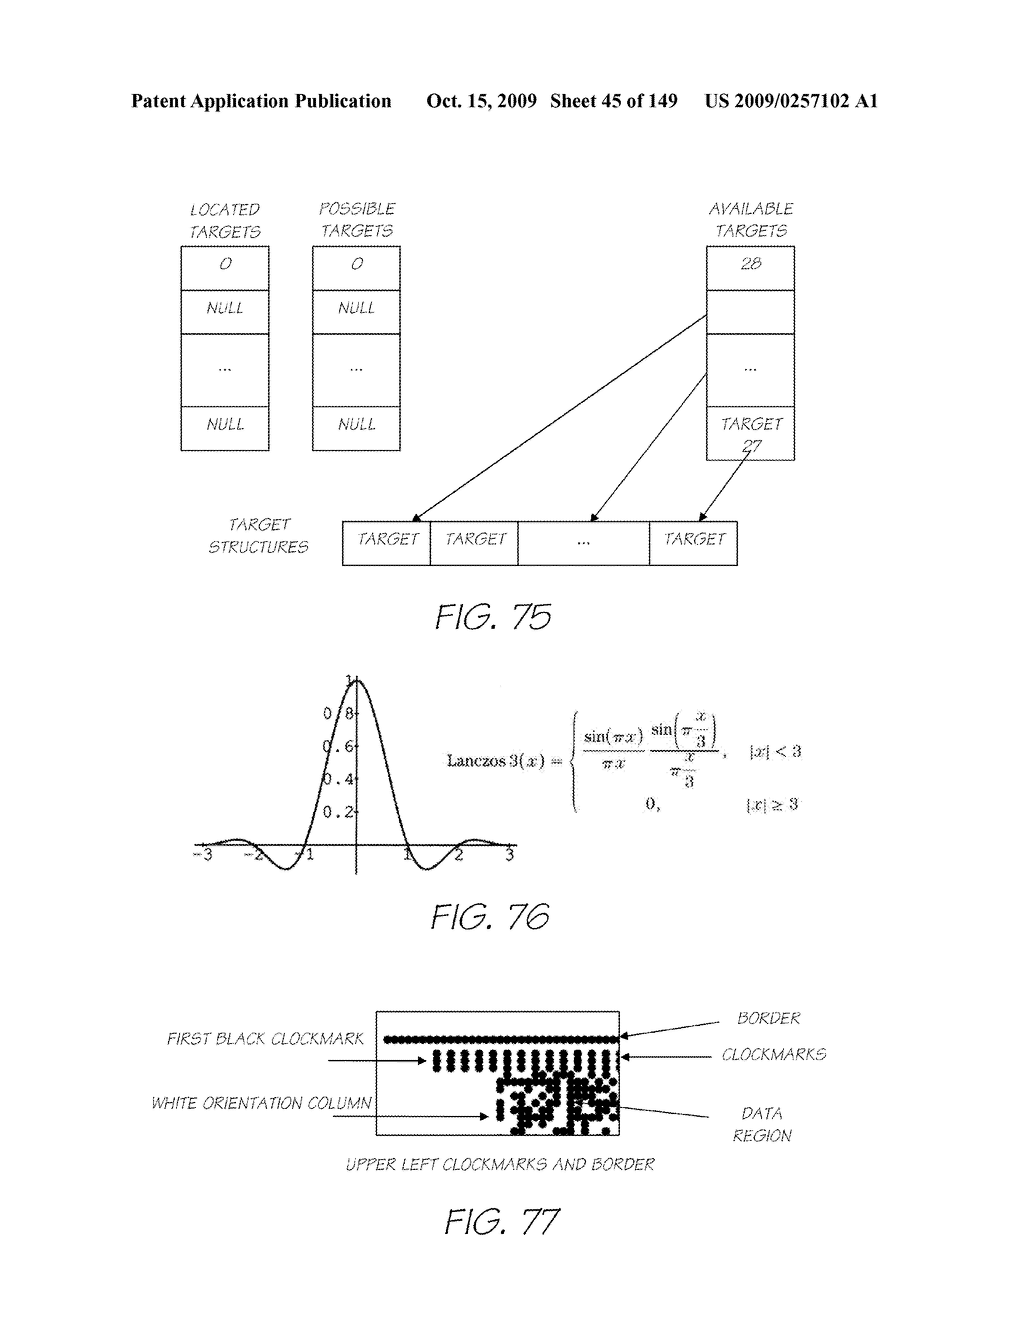 IMAGE PROCESSING APPARATUS HAVING CARD READER FOR APPLYING EFFECTS STORED ON A CARD TO A STORED IMAGE - diagram, schematic, and image 46